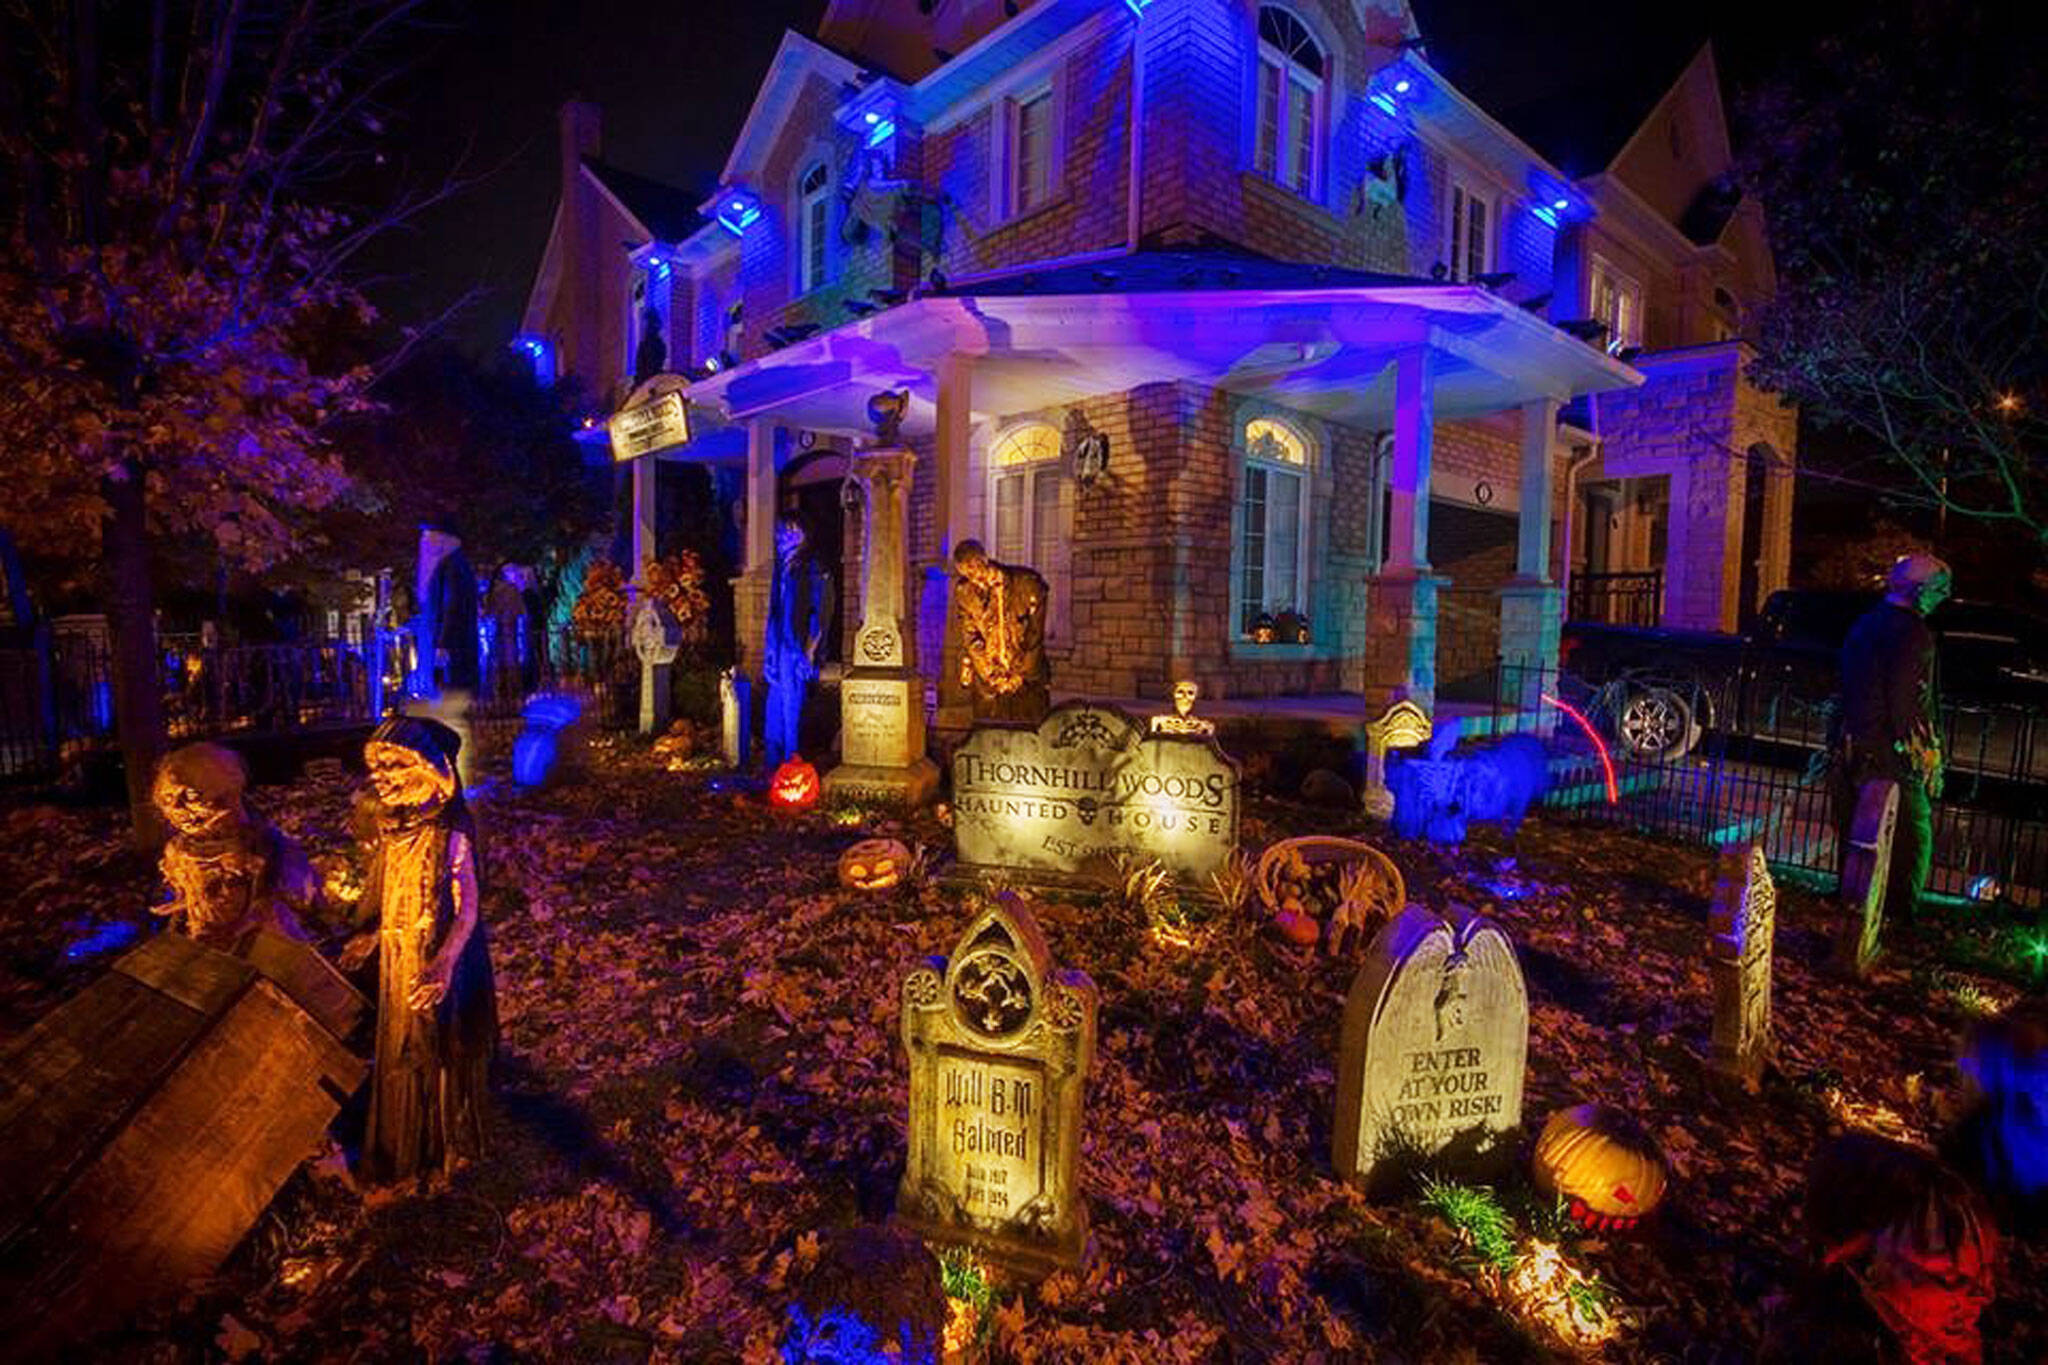 These Toronto homes went totally over-the-top with decorations for